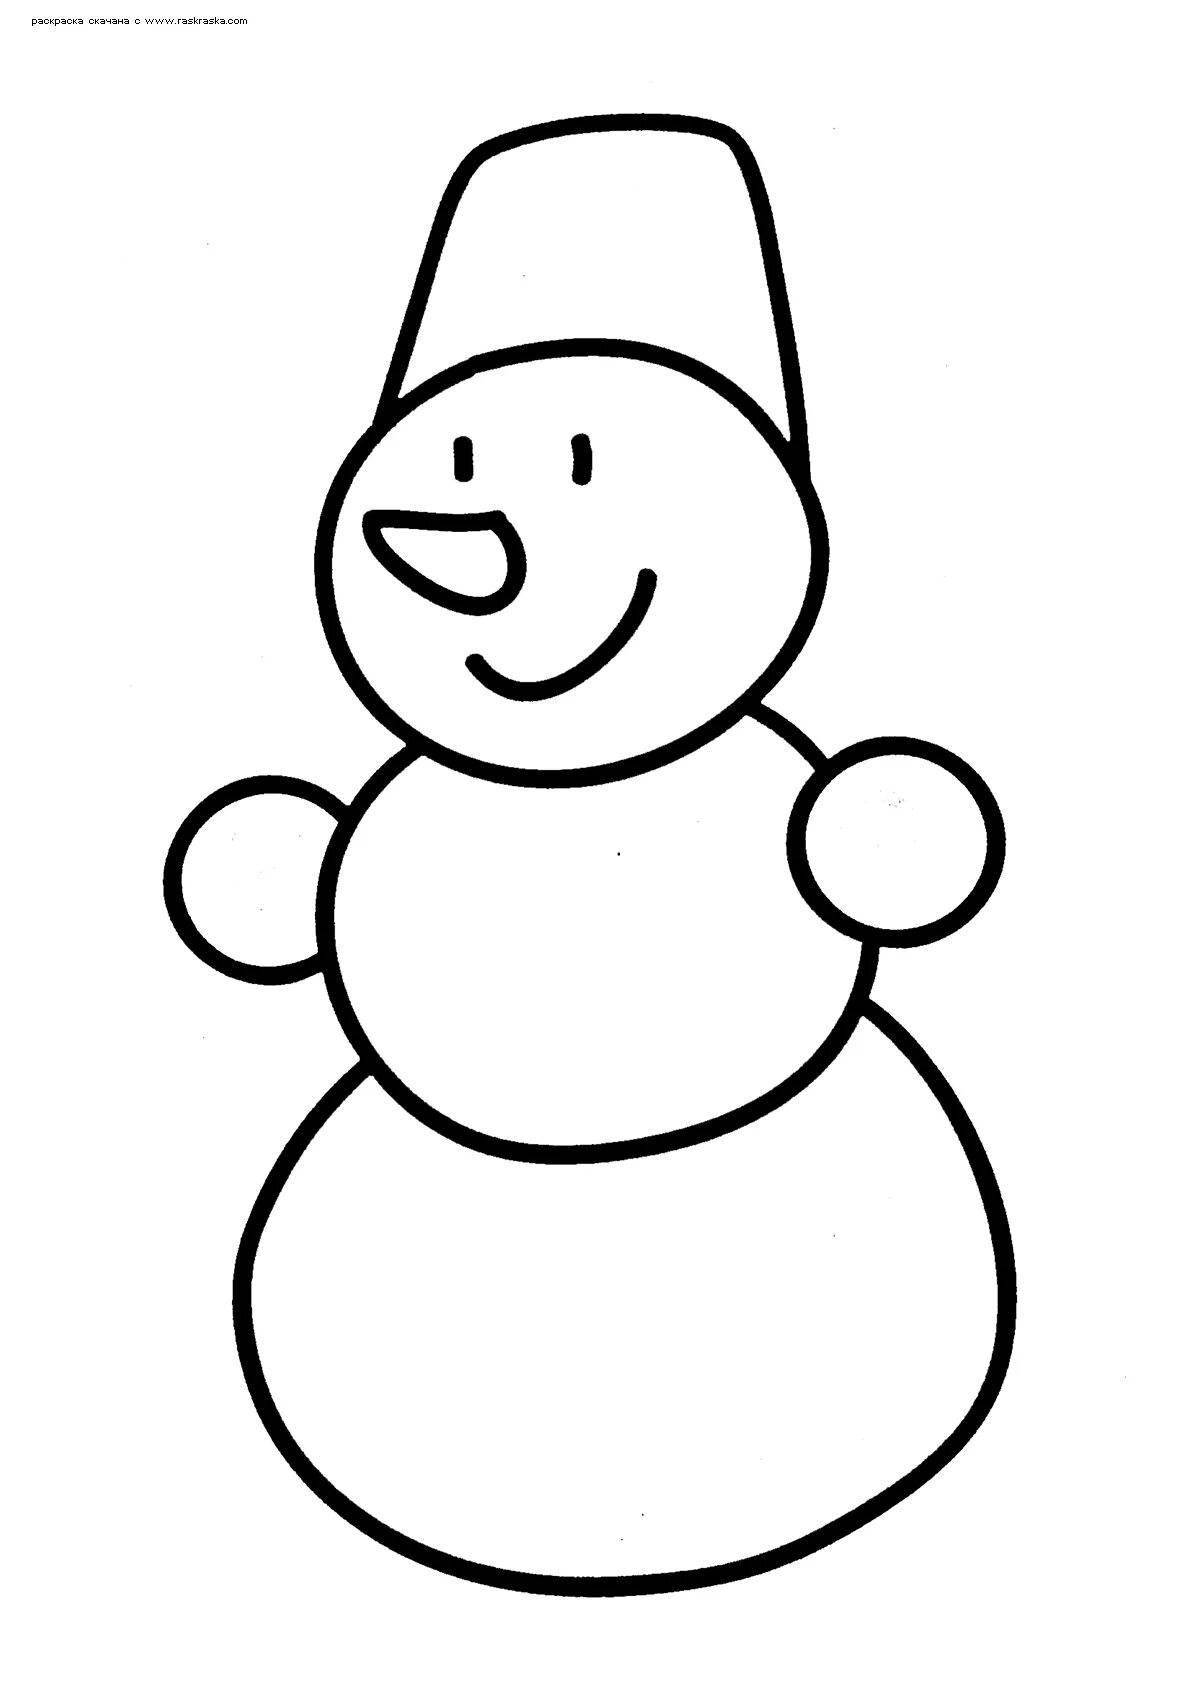 Playful coloring of a snowman without a nose